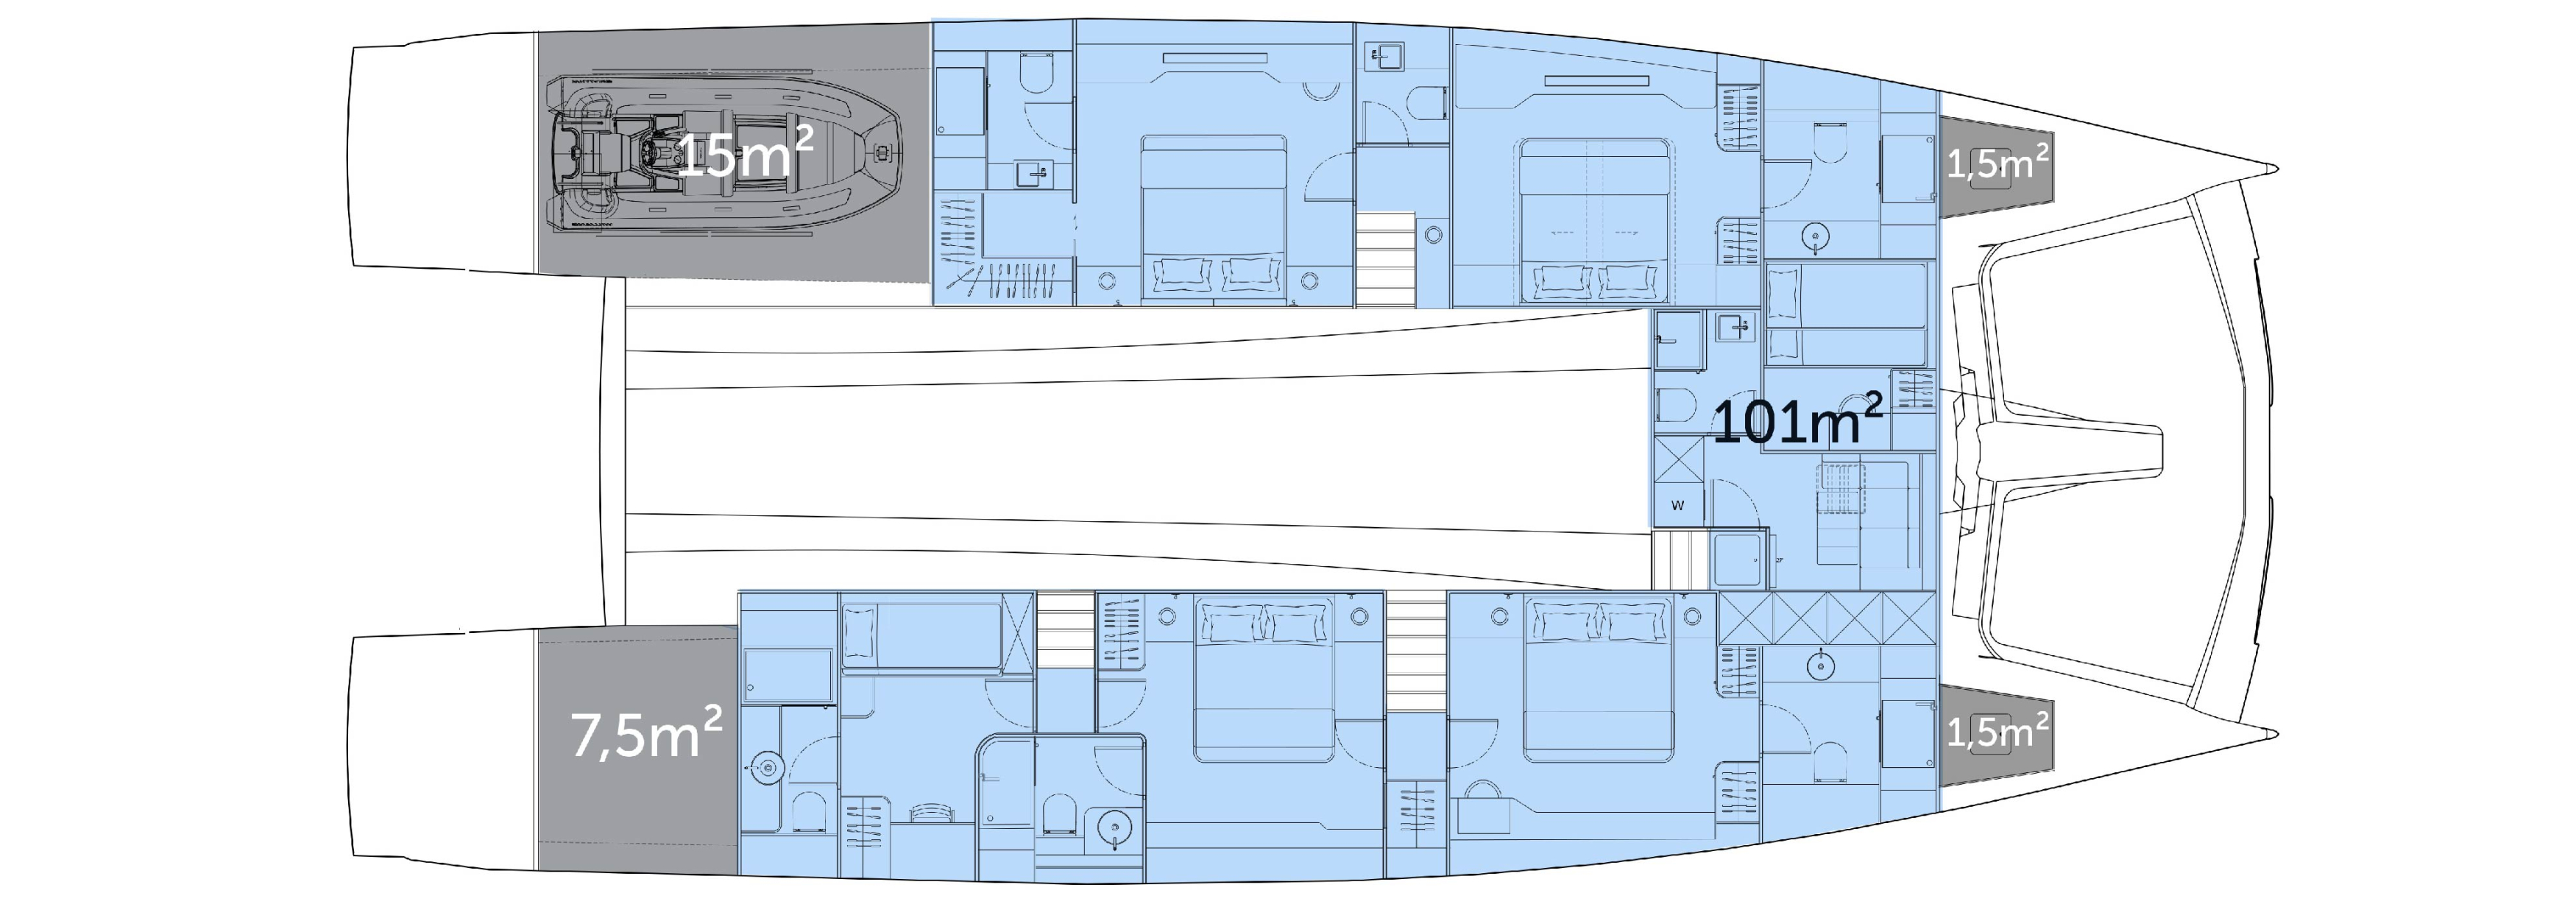 Silent 80 yacht 5 cabins lower deck area plan